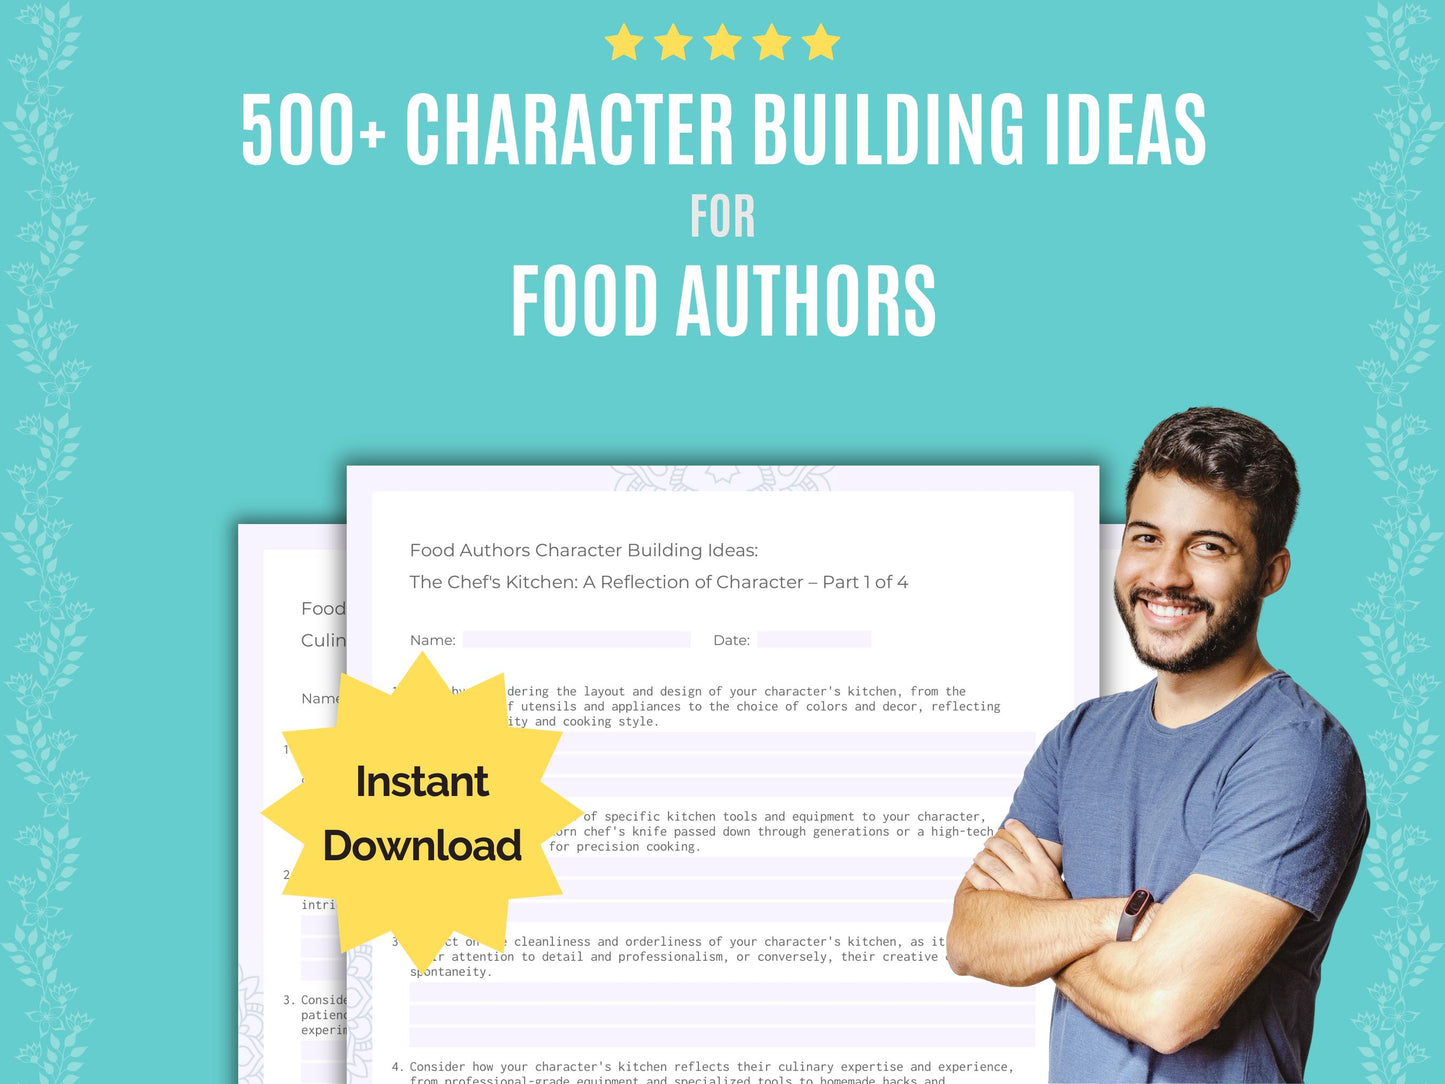 Food Authors Character Building Ideas